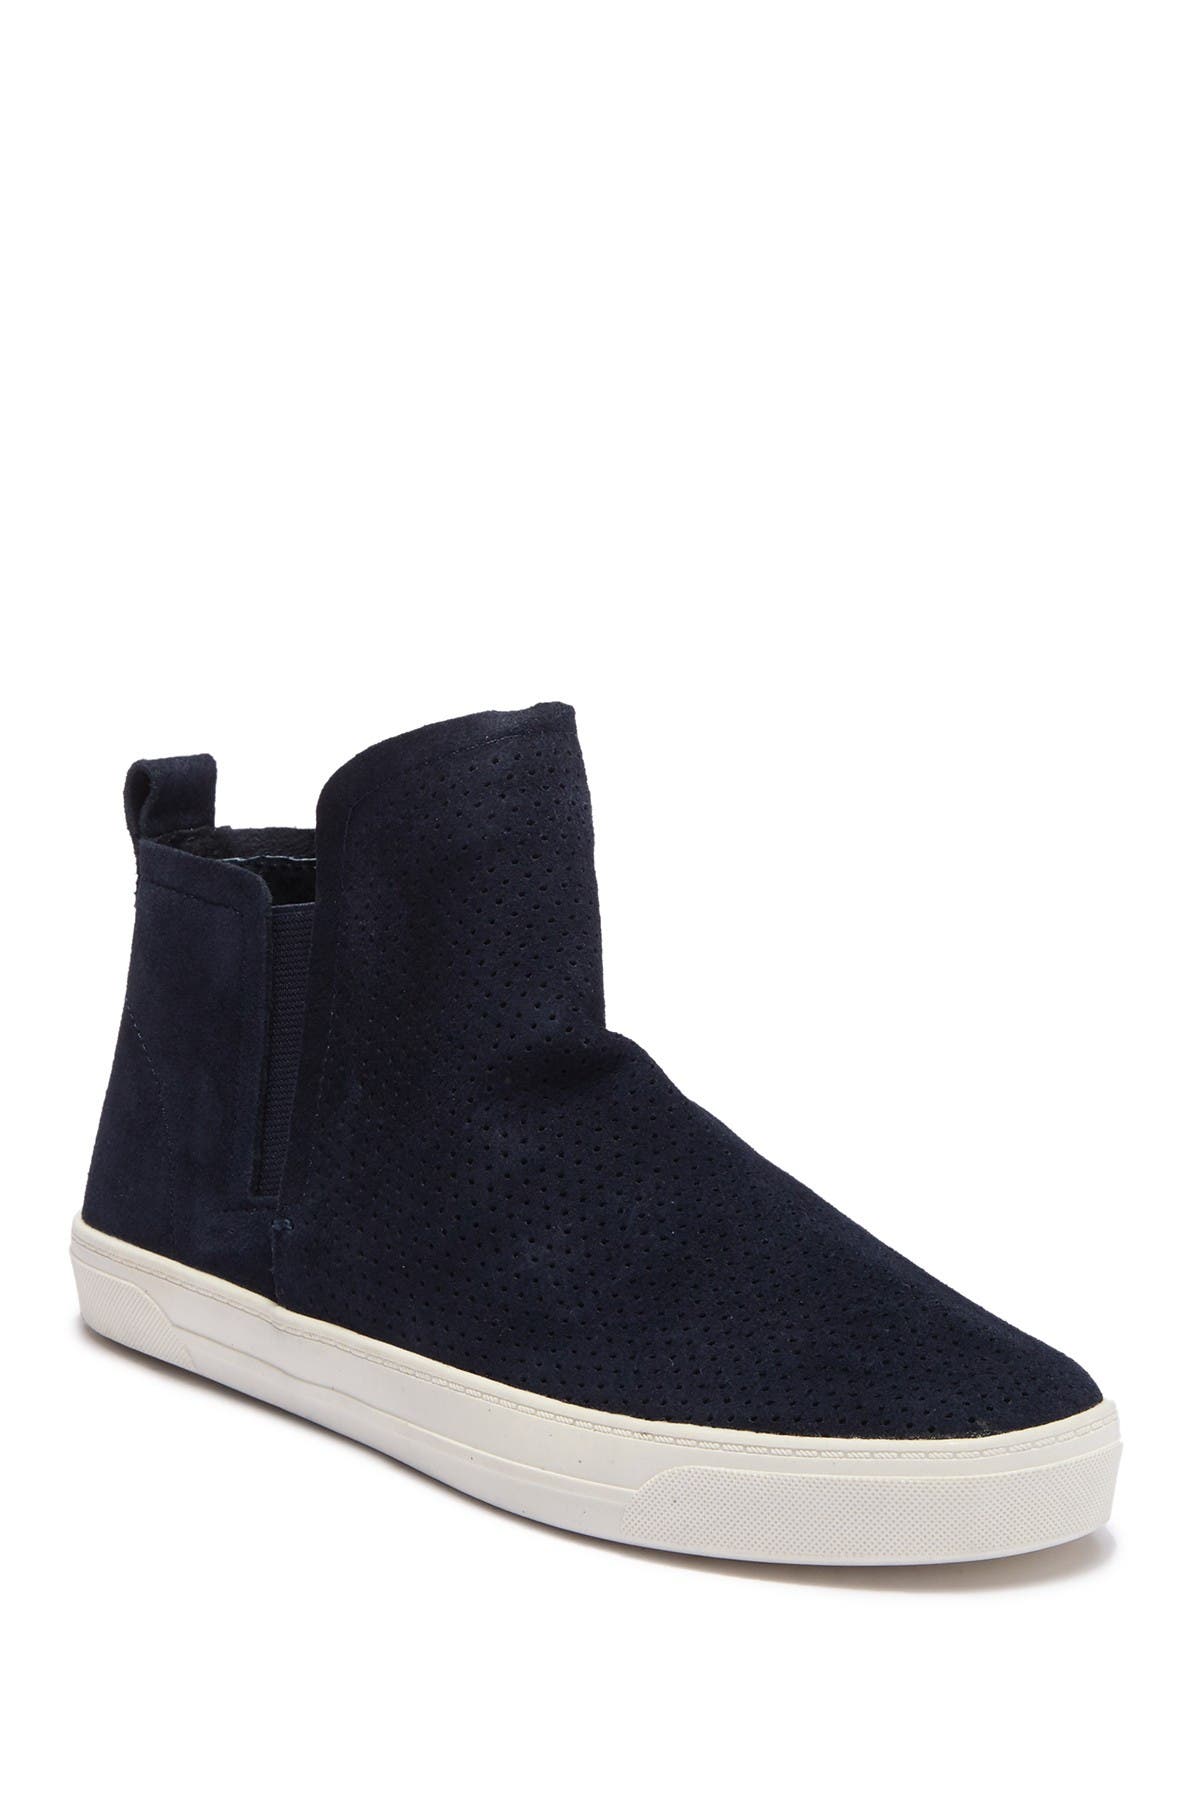 dolce vita xane perforated suede sneaker